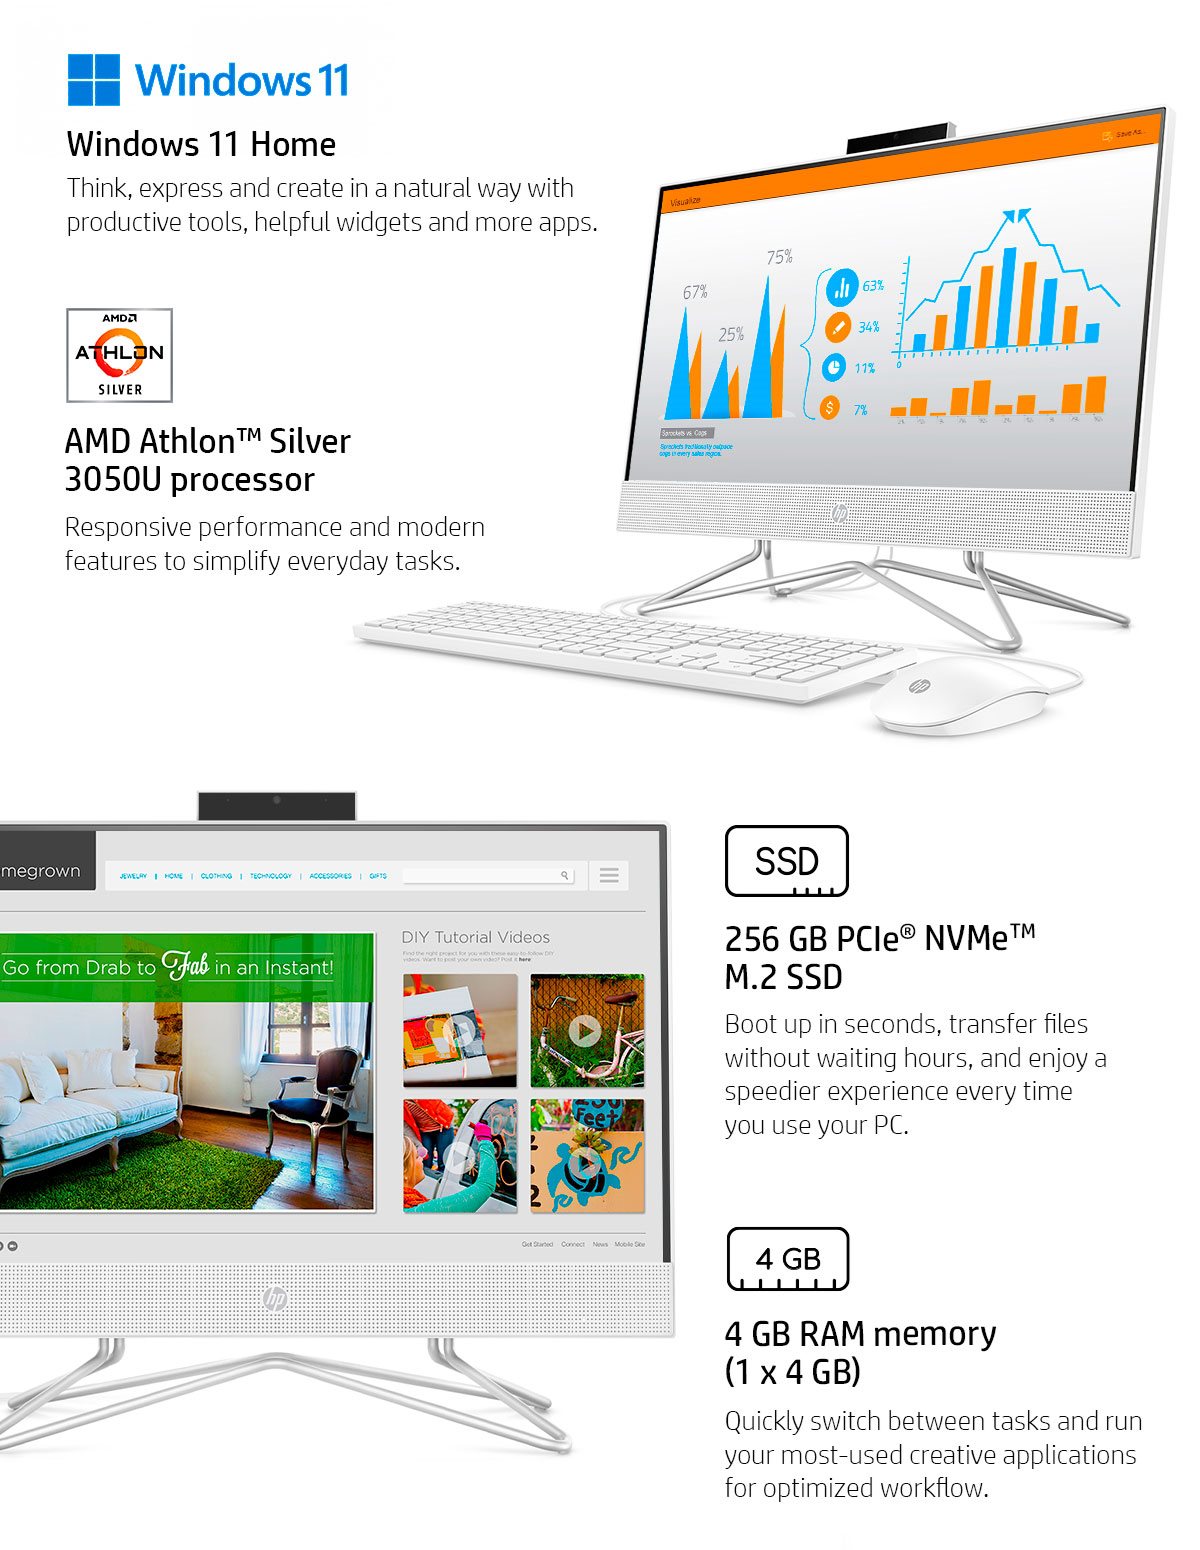 HP 22 All-in-One PC specifications